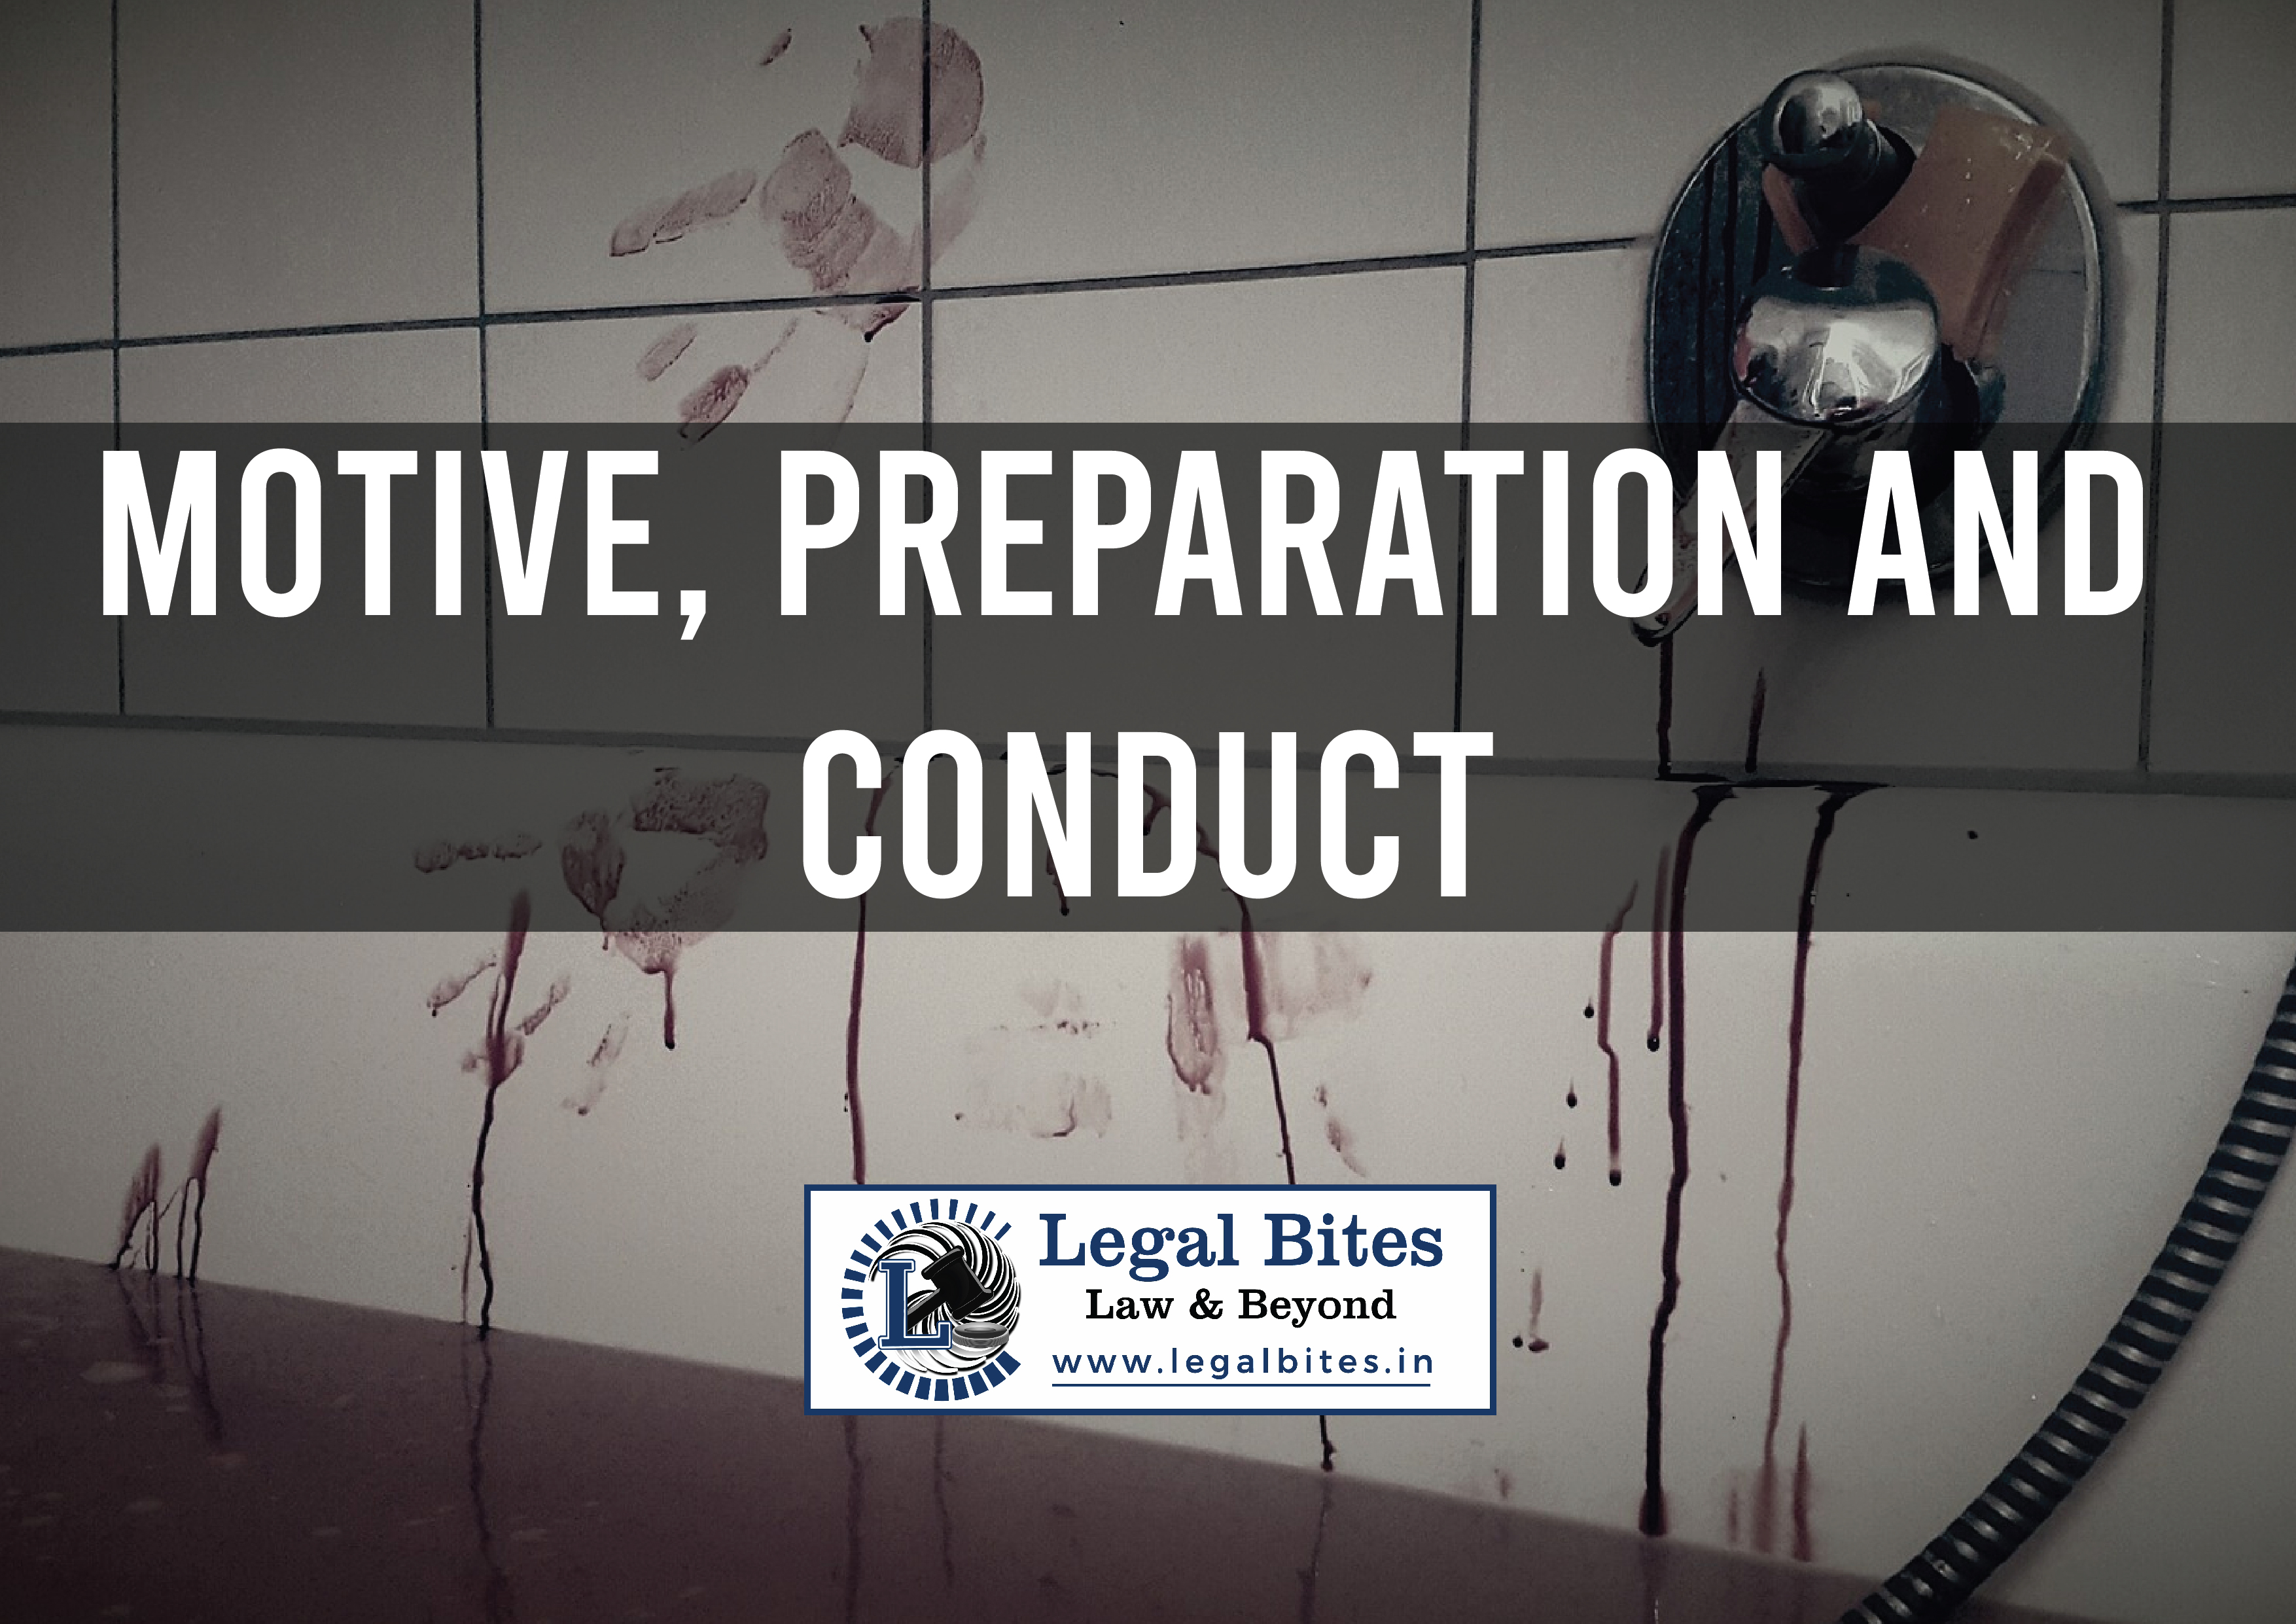 Motive, Preparation and Conduct